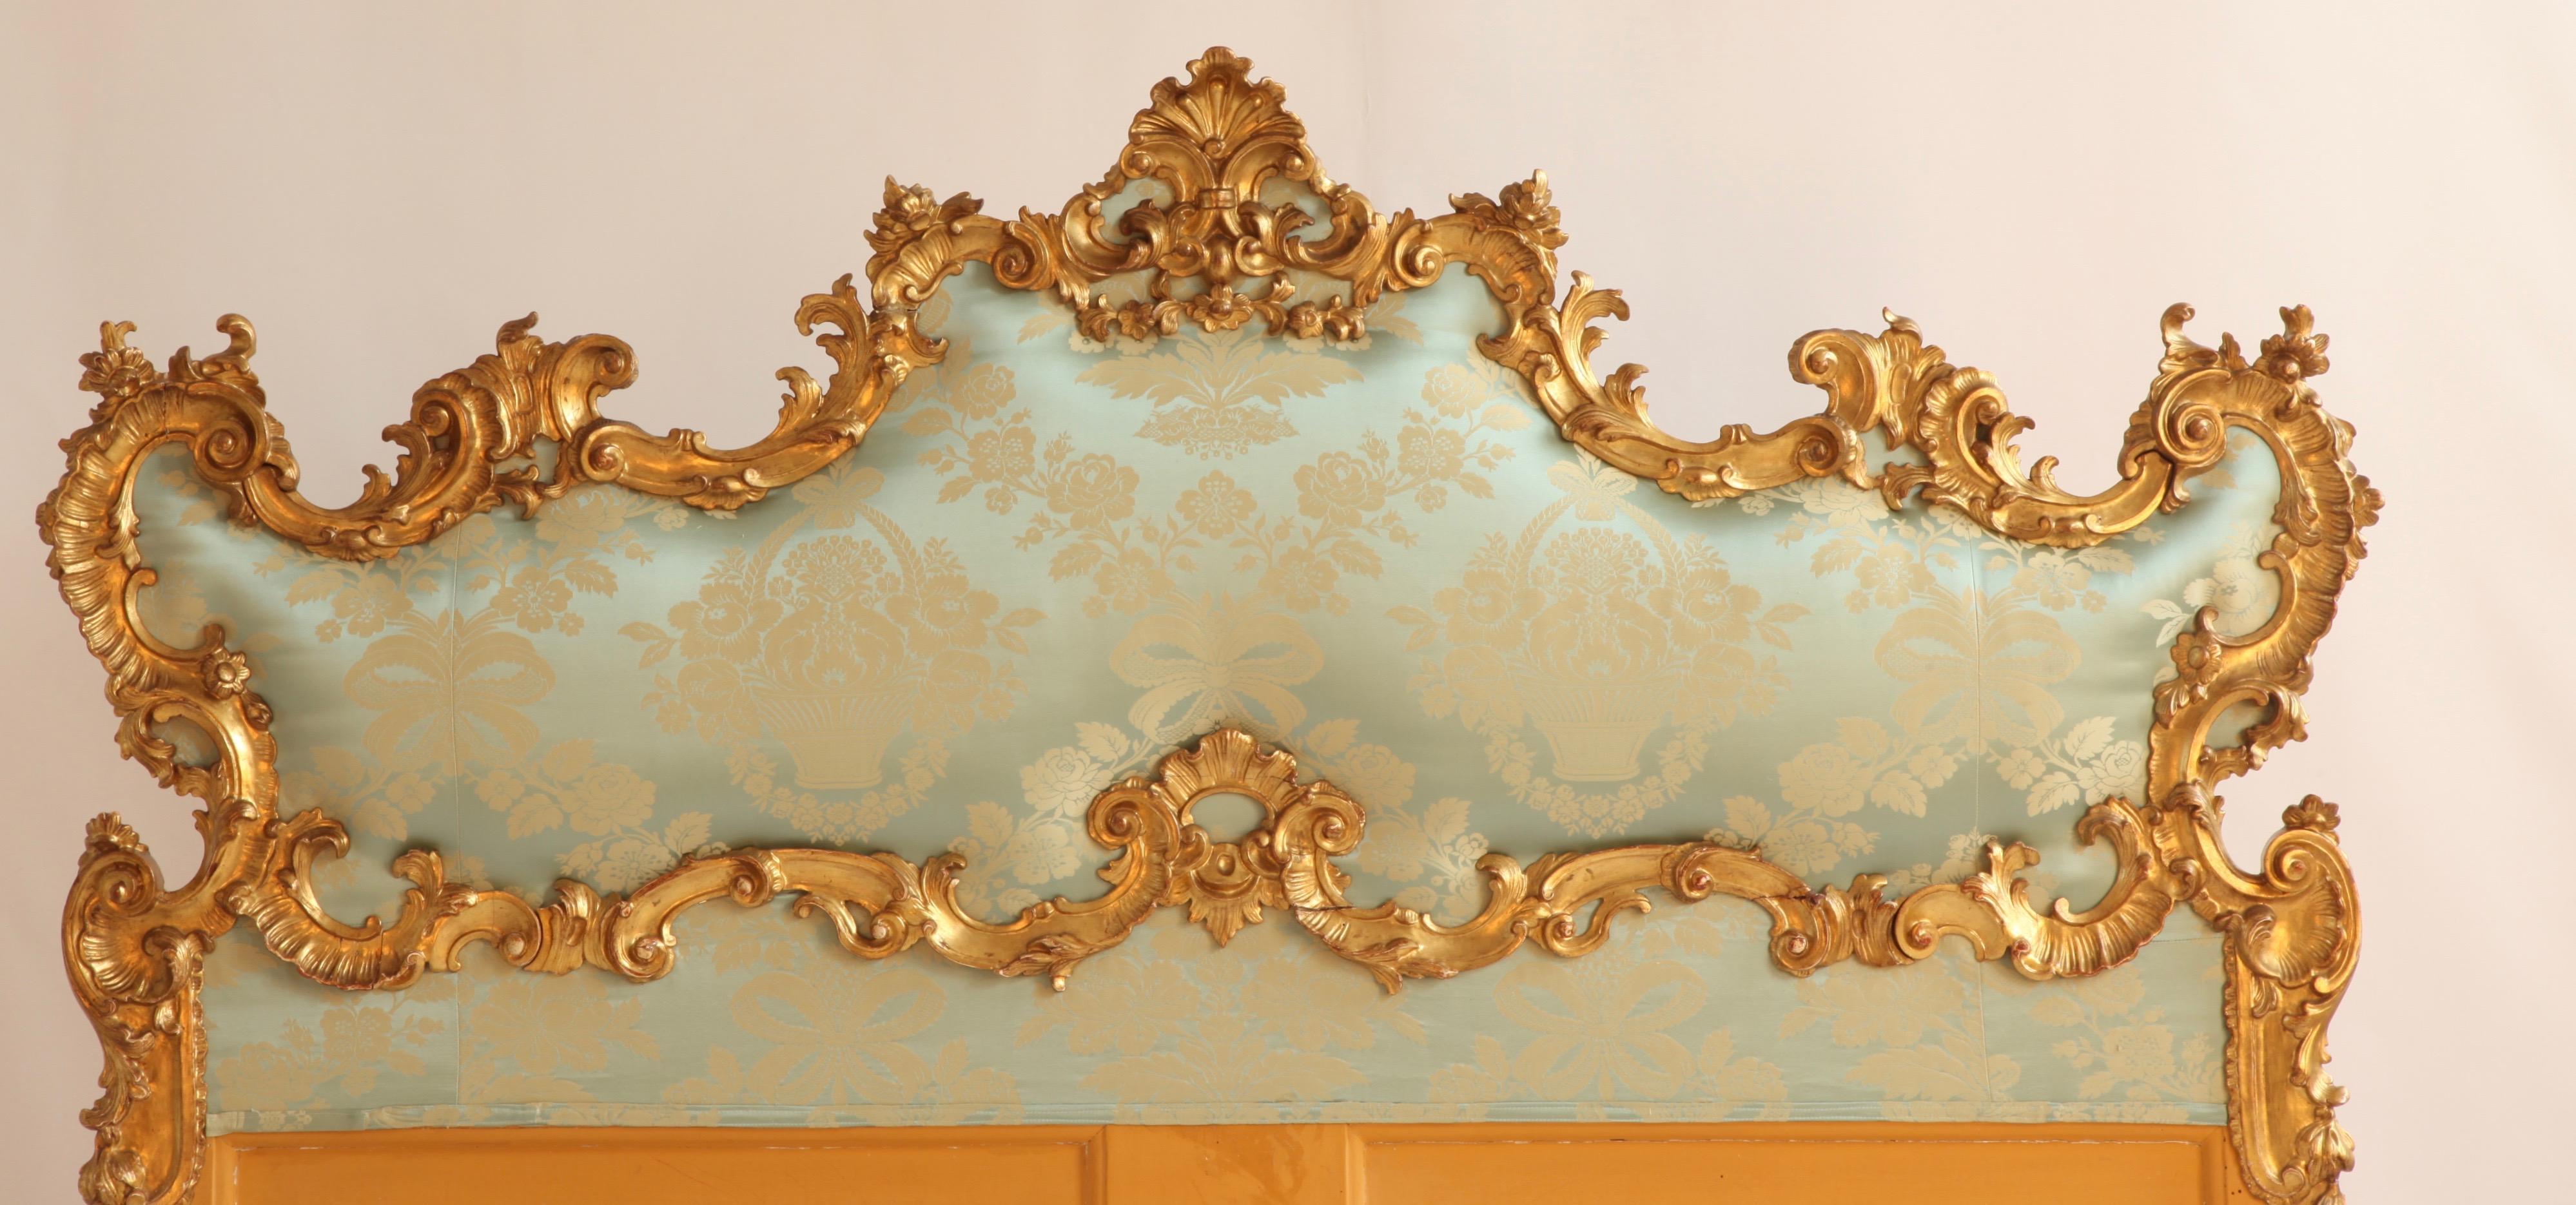 Antique Italian large giltwood headboard from late 19th century.
Reupholstered with a sea green/light blue silk damask.
Fine carving with details of Louis XV scrolls, shells and flowers all around.

    